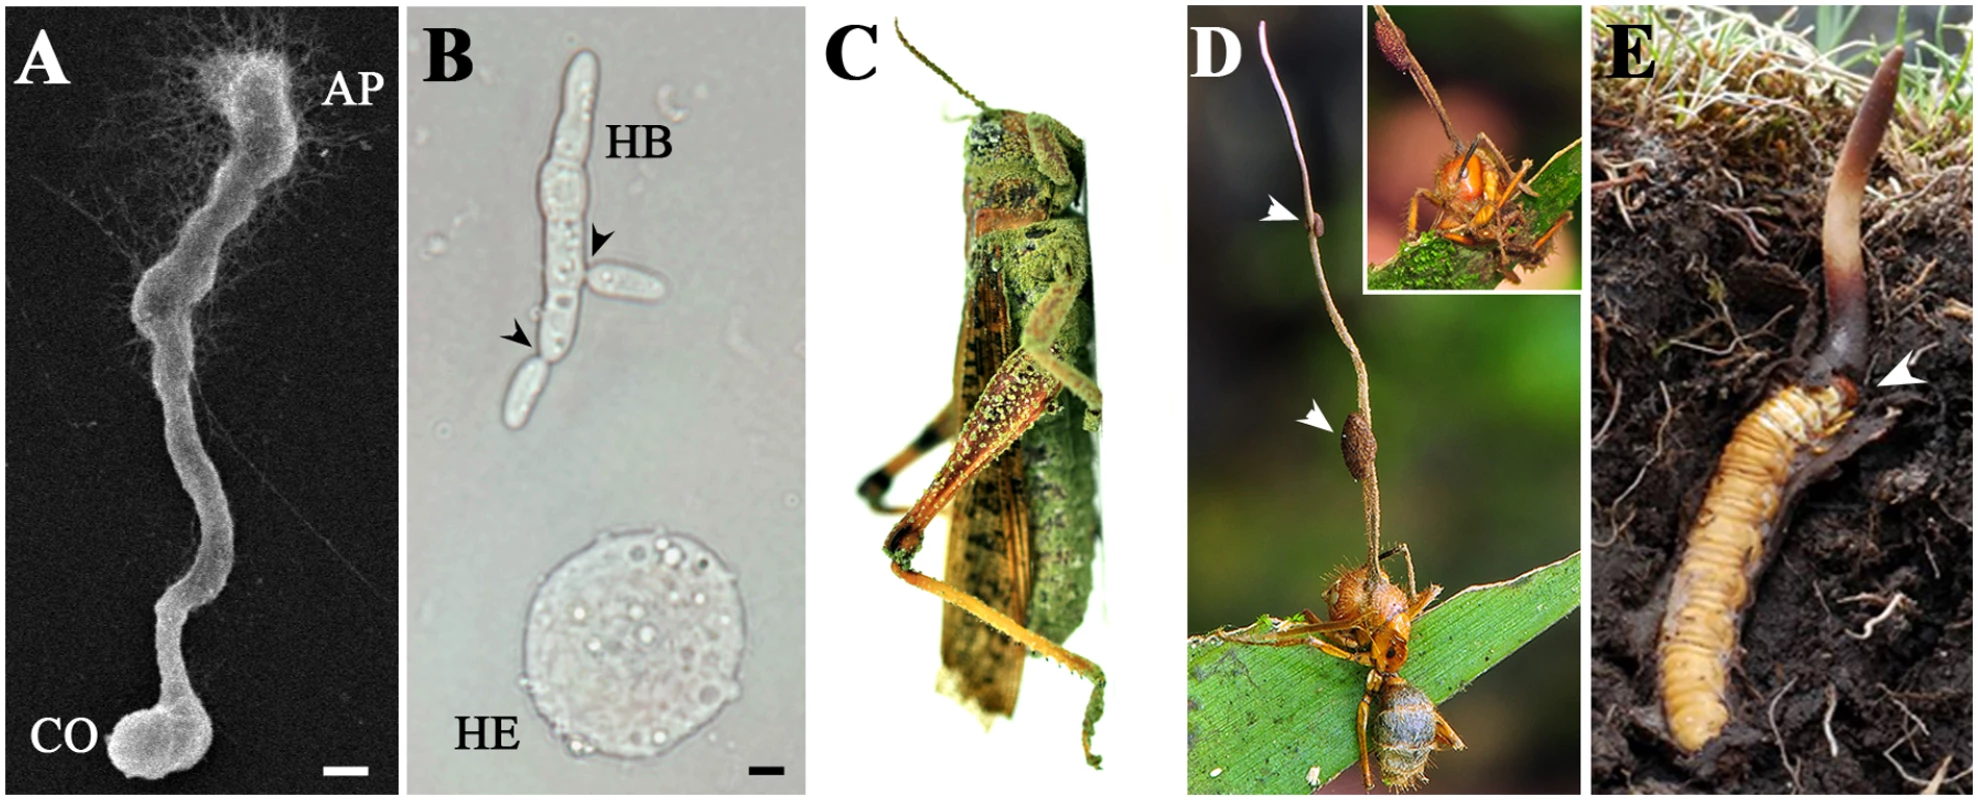 Micro- and macrophenotypes related to fungal infection and colonization of insect hosts.